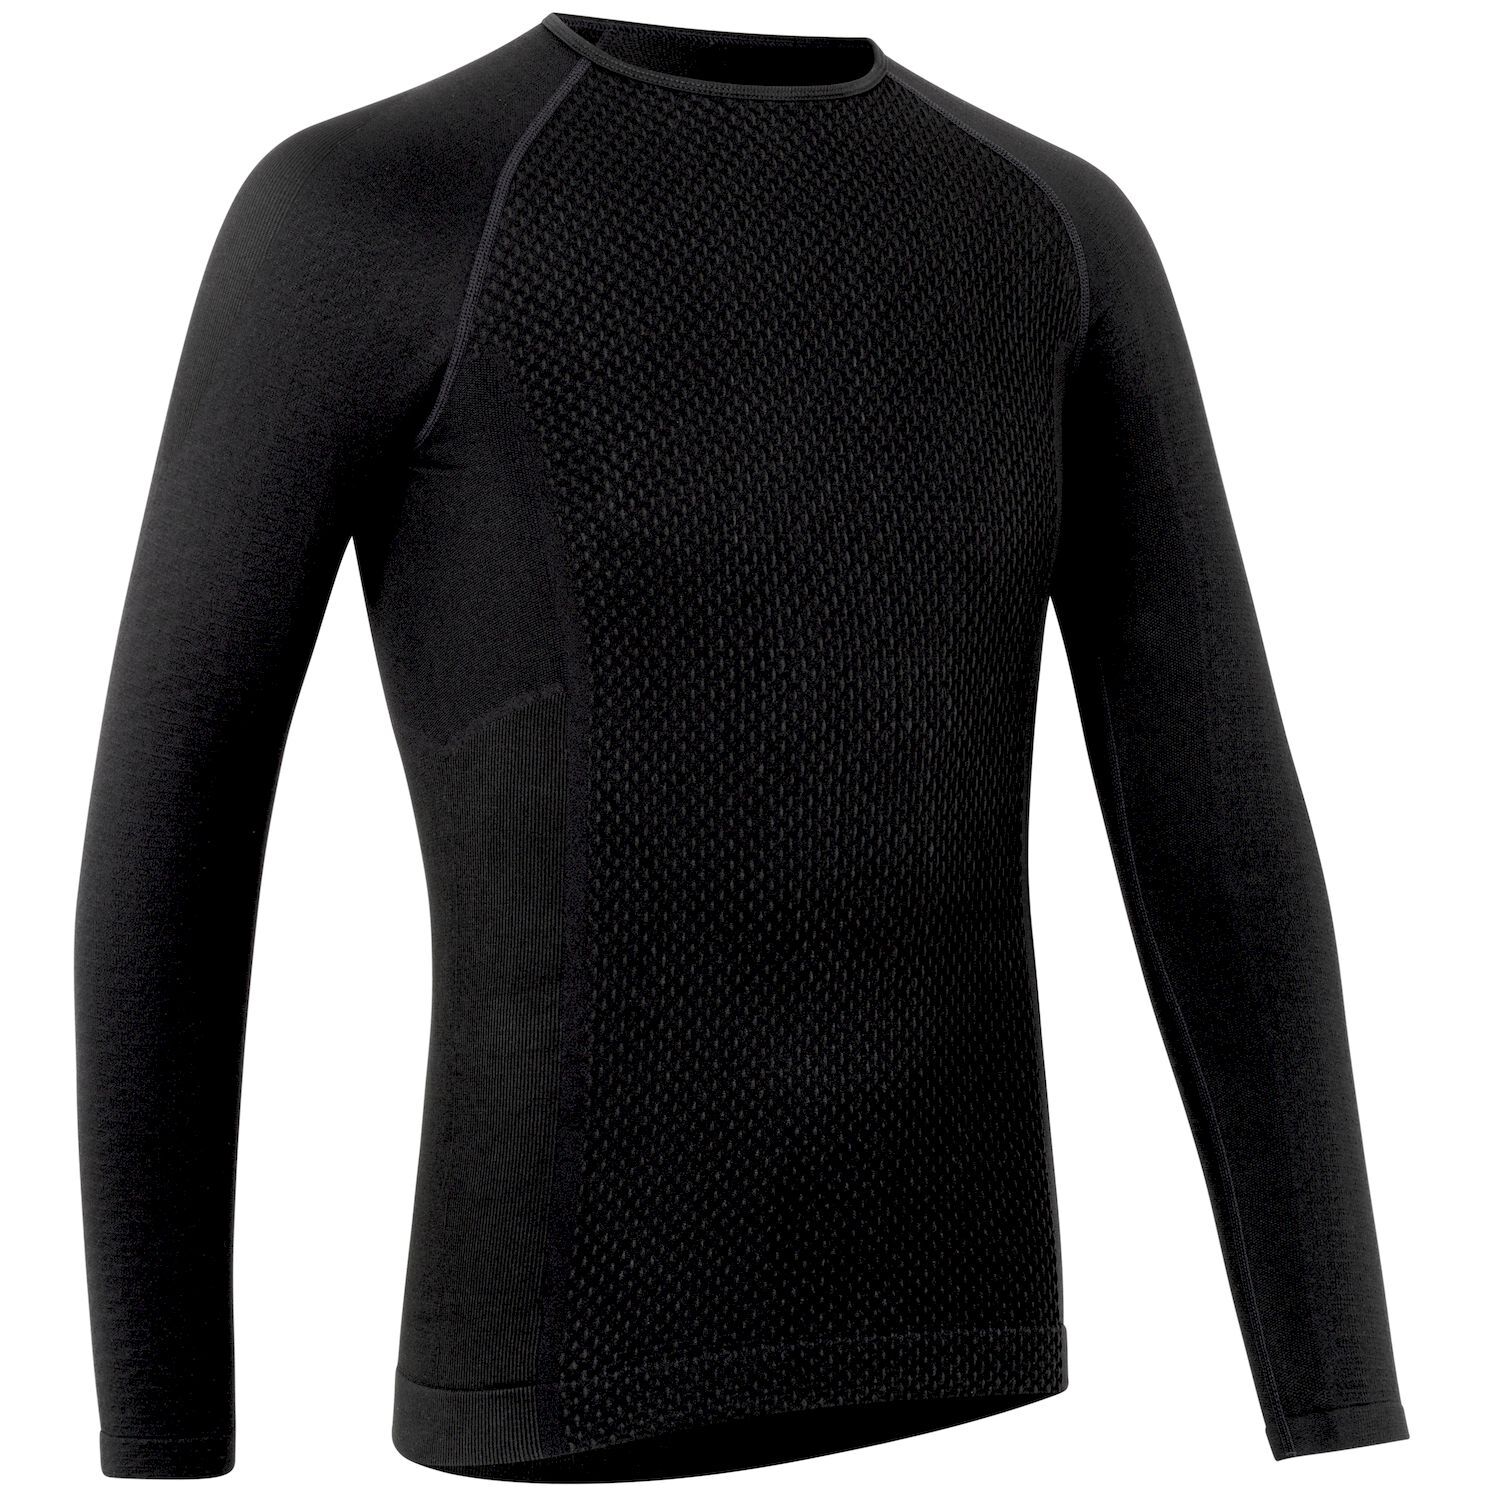 GripGrab Expert Seamless Long Sleeve Thermal Base Layer 2 - Ropa interior